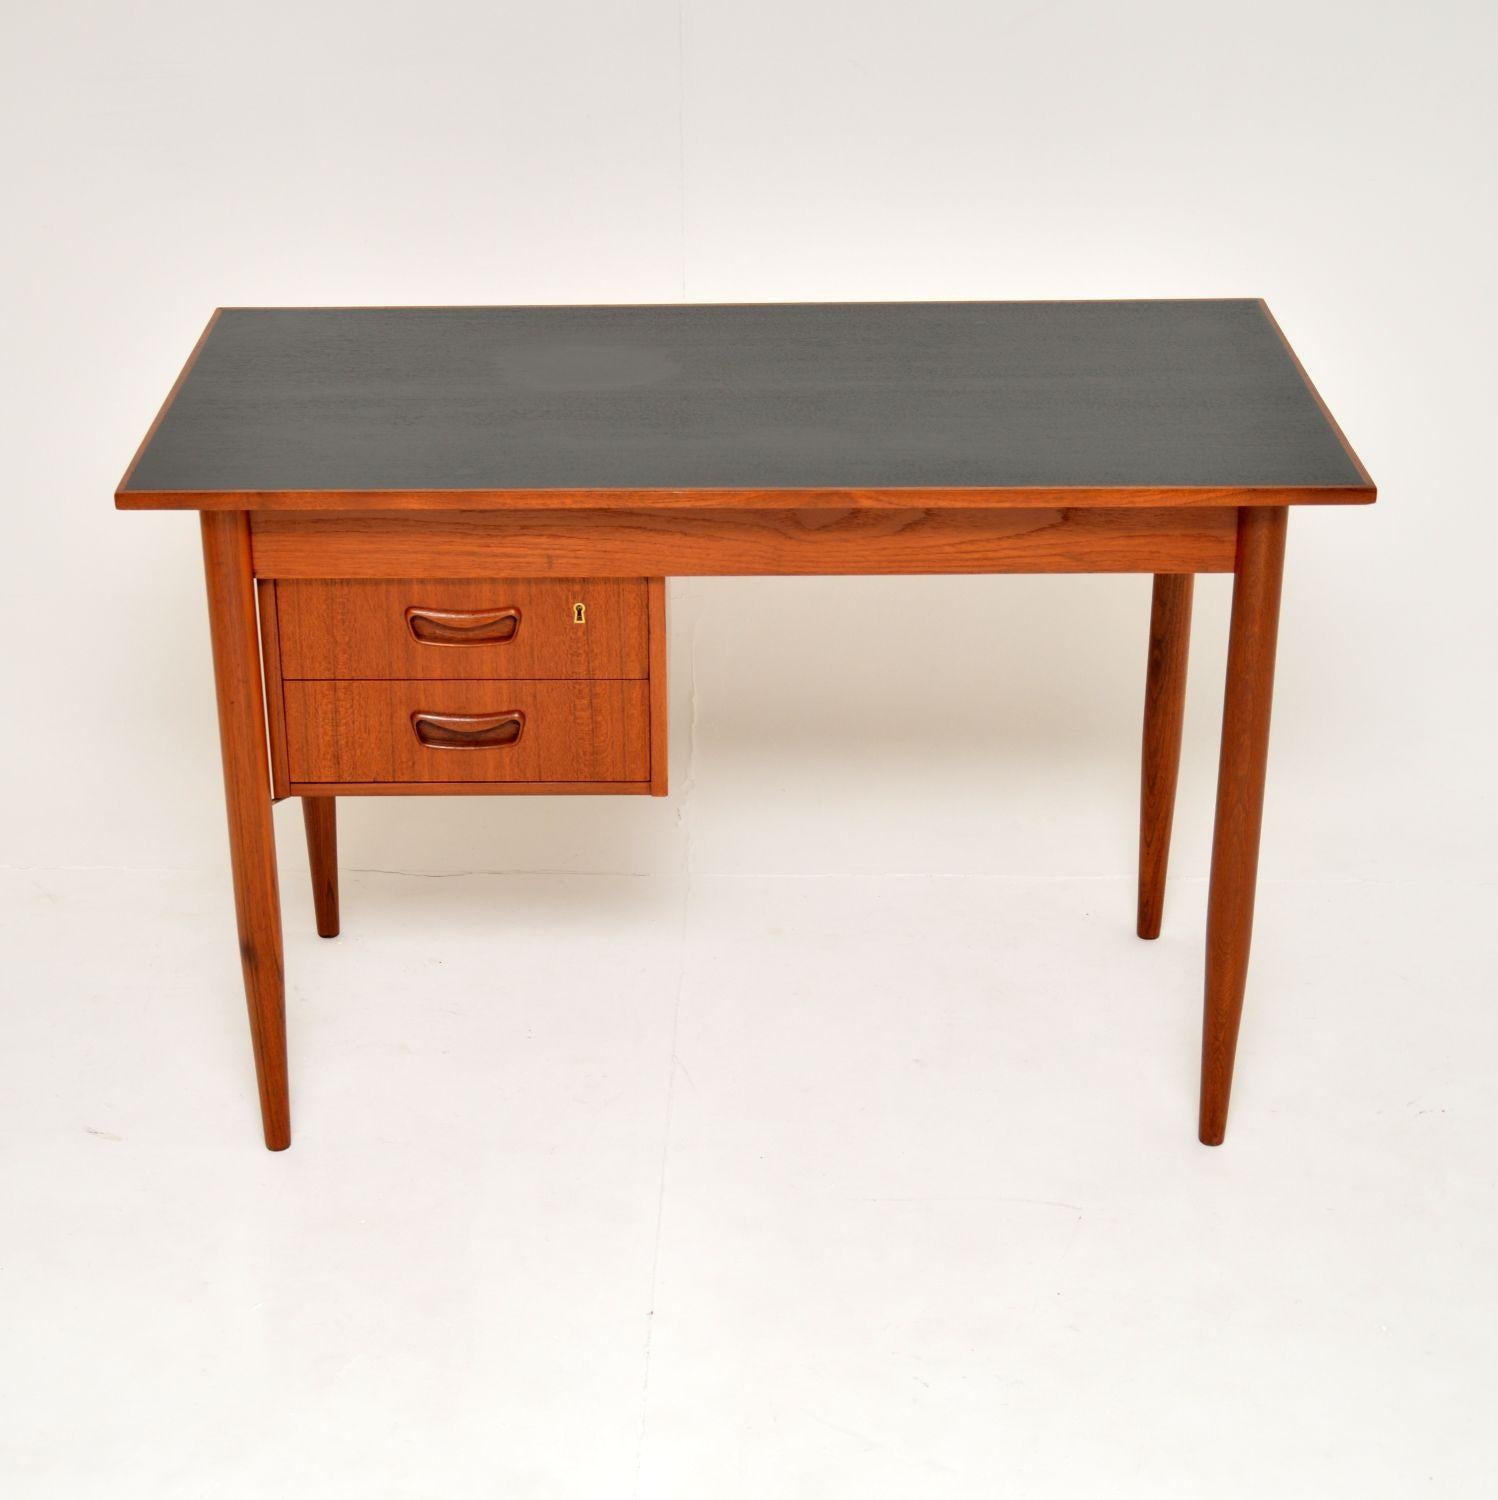 A sleek and stylish Danish vintage teak desk. This was designed by Gunnar Nielsen for Tibergaard, it dates from the 1960’s.

It is of useful proportions and is of excellent quality. The top is ebonised, the rest of the desk is finished in